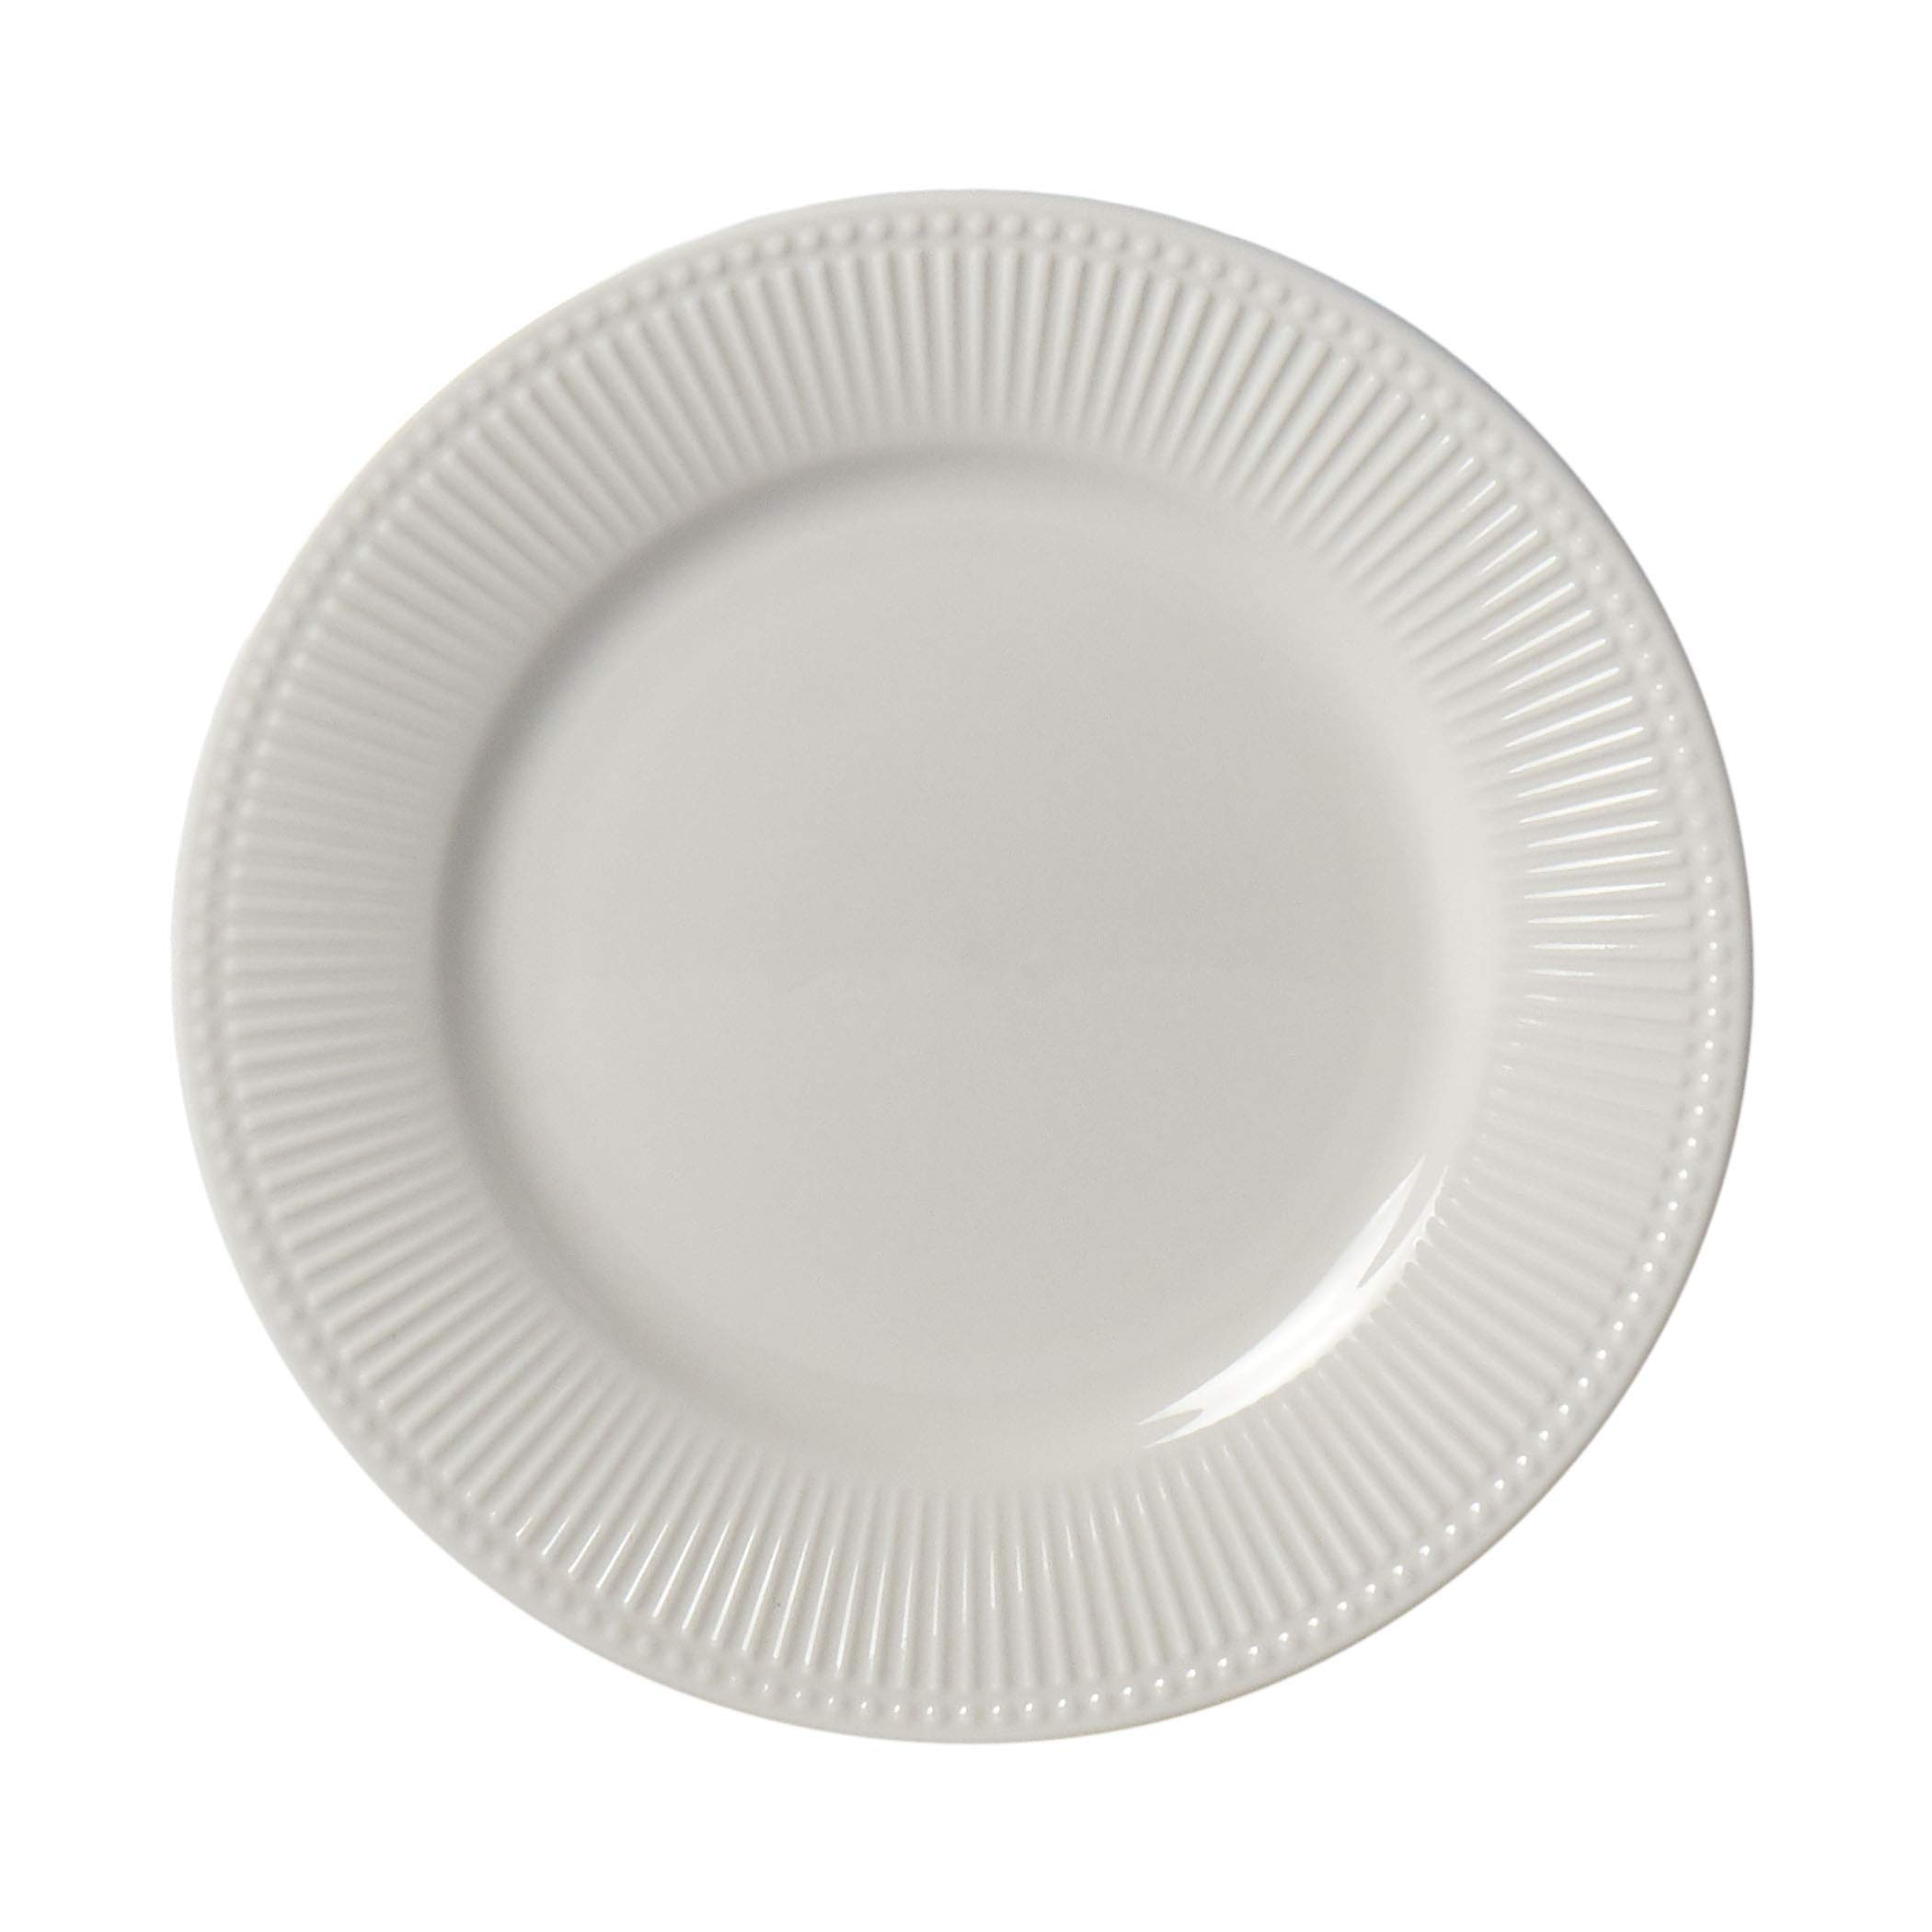 Tabletops Gallery Embossed Bone White Porcelain Round Dinnerware Collection- Chip Resistant Scratch Resistant, Fleur 16 Piece Dinnerware Set (Dinner Plate, Salad Plate, Cereal Bowl, Mug)